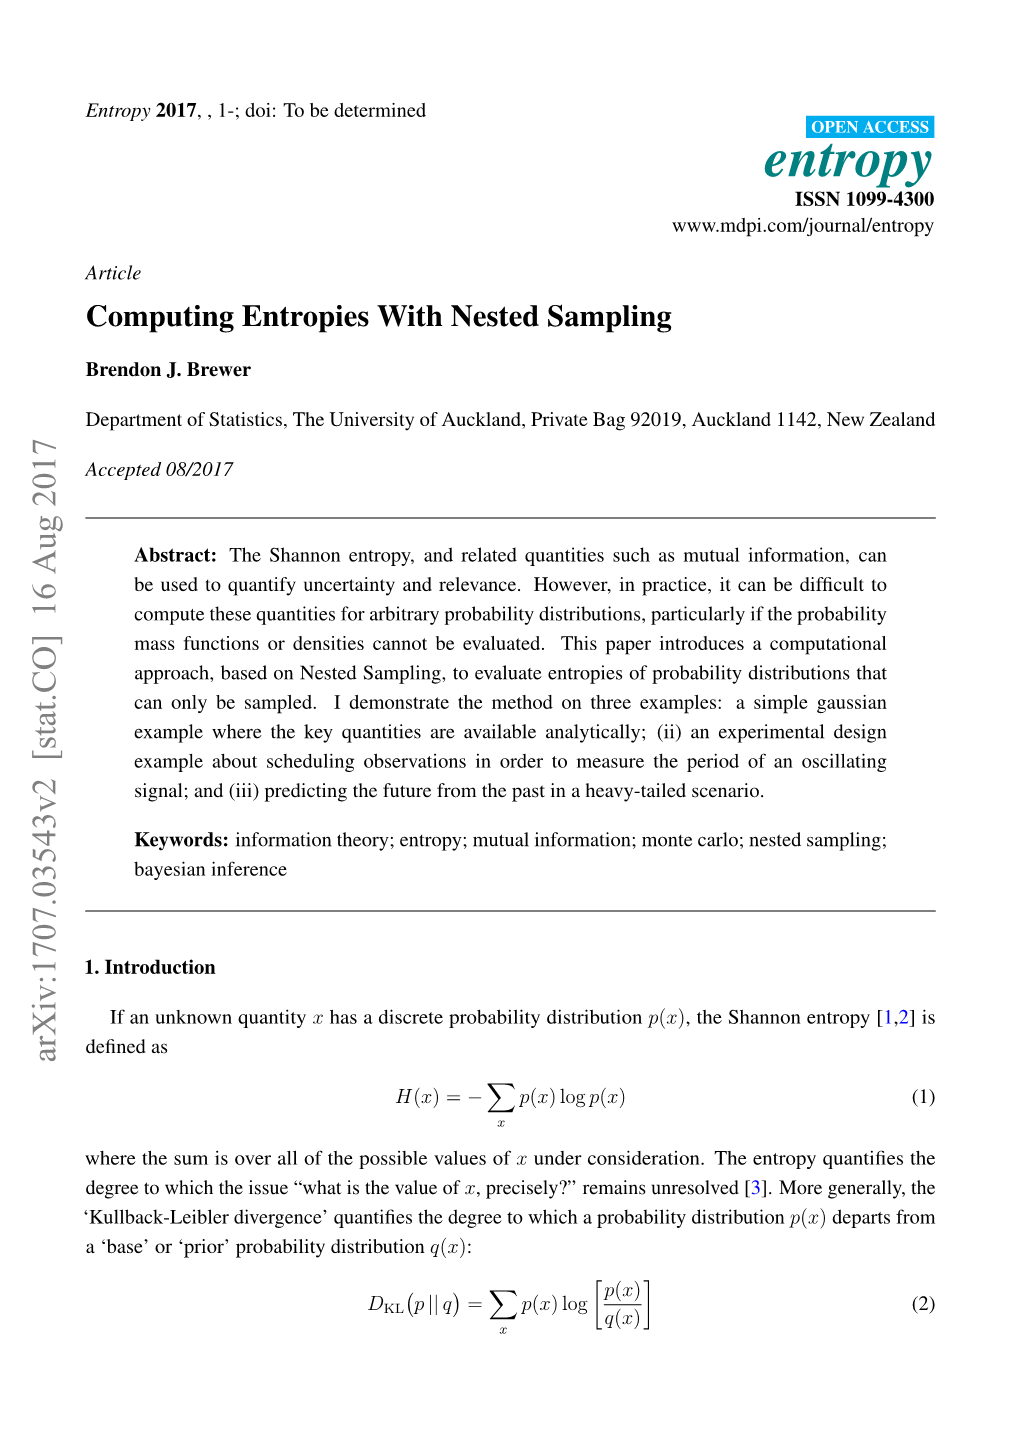 Computing Entropies with Nested Sampling